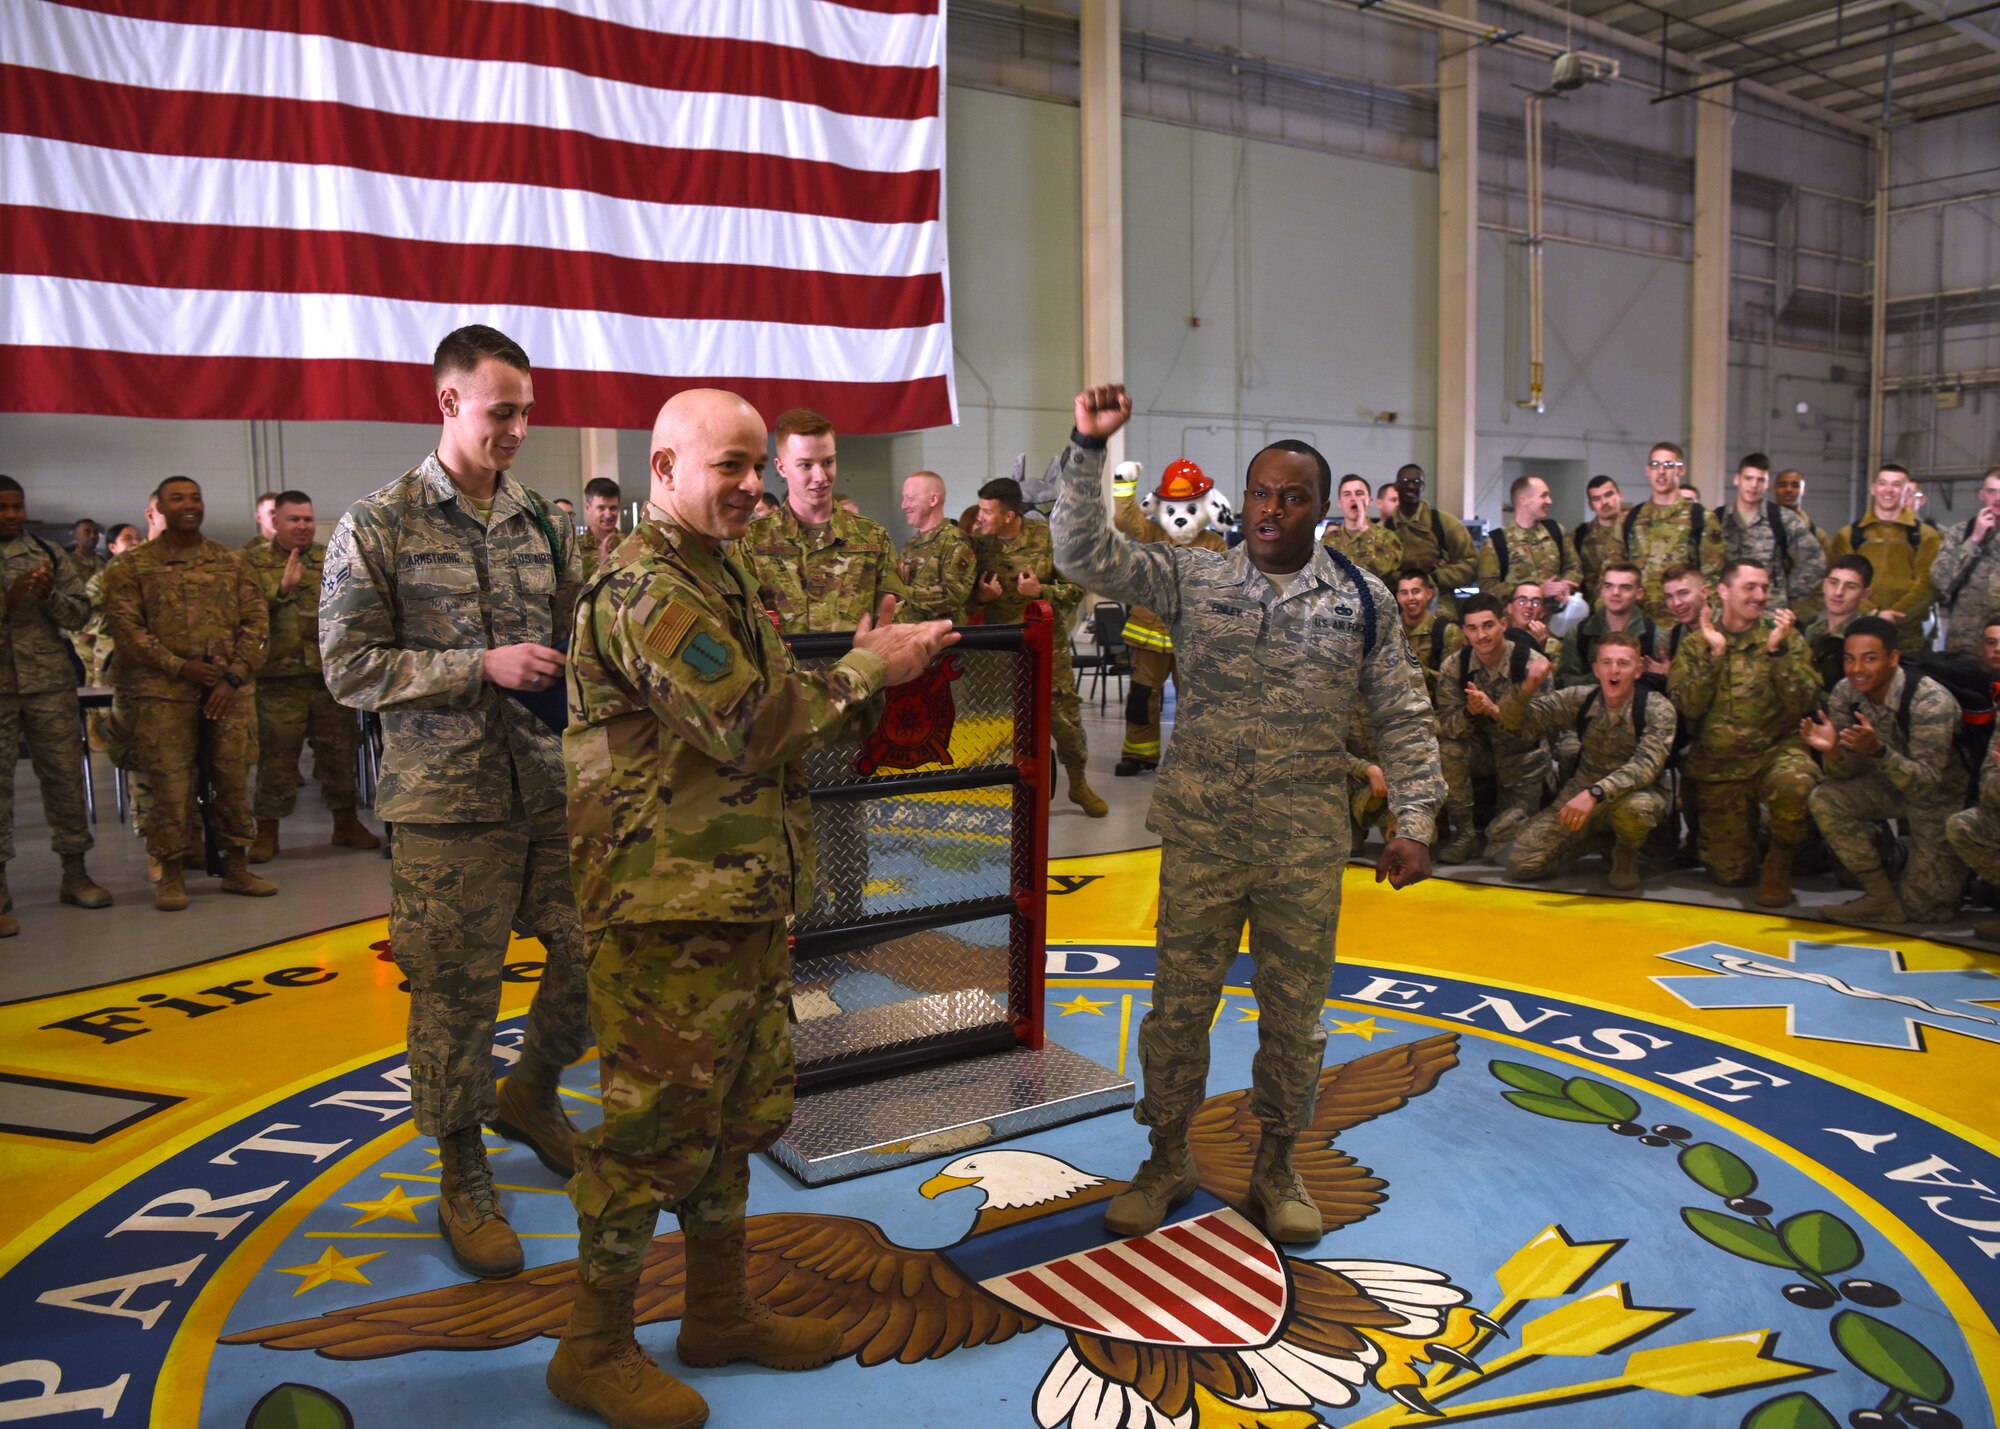 U.S. Air Force Col. Andres Nazario, 17th Training Wing commander, recognizes Tech. Sgt. Derwin Finley, 312th Training Squadron assistant flight chief and military training leader, as the winner of the Master MTL Program in the Louis F. Garland Department of Defense Fire Academy High Bay on Goodfellow Air Force Base, Texas, Feb. 7, 2020. Finley earned the first Master MTL position in the Air Education and Training Command history.  (U.S. Air Force photo by Airman 1st Class Abbey Rieves)